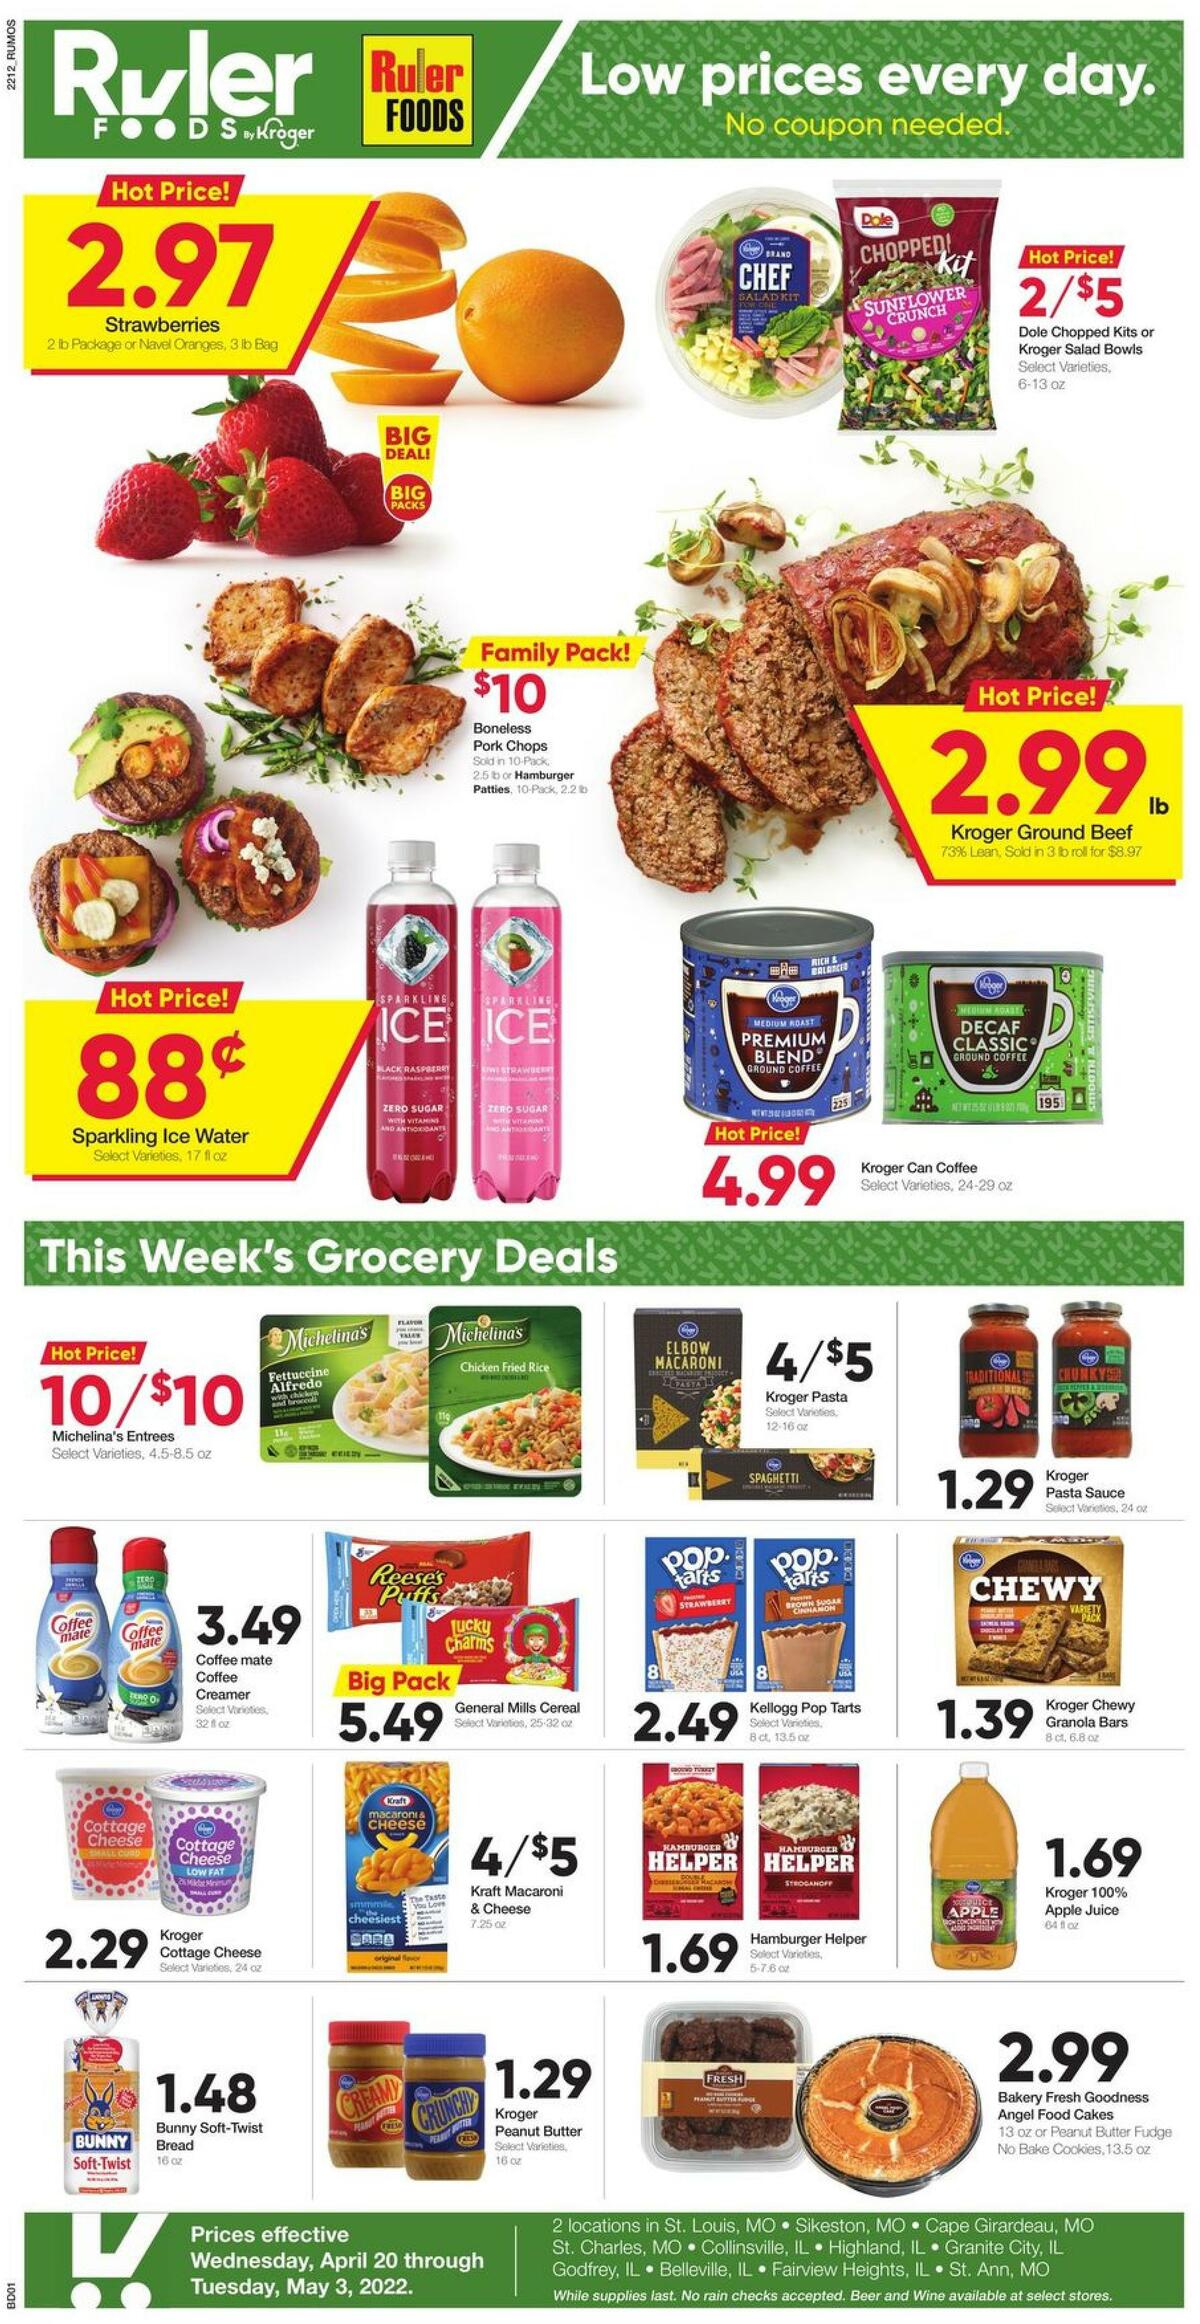 Ruler Foods Weekly Ad from April 20